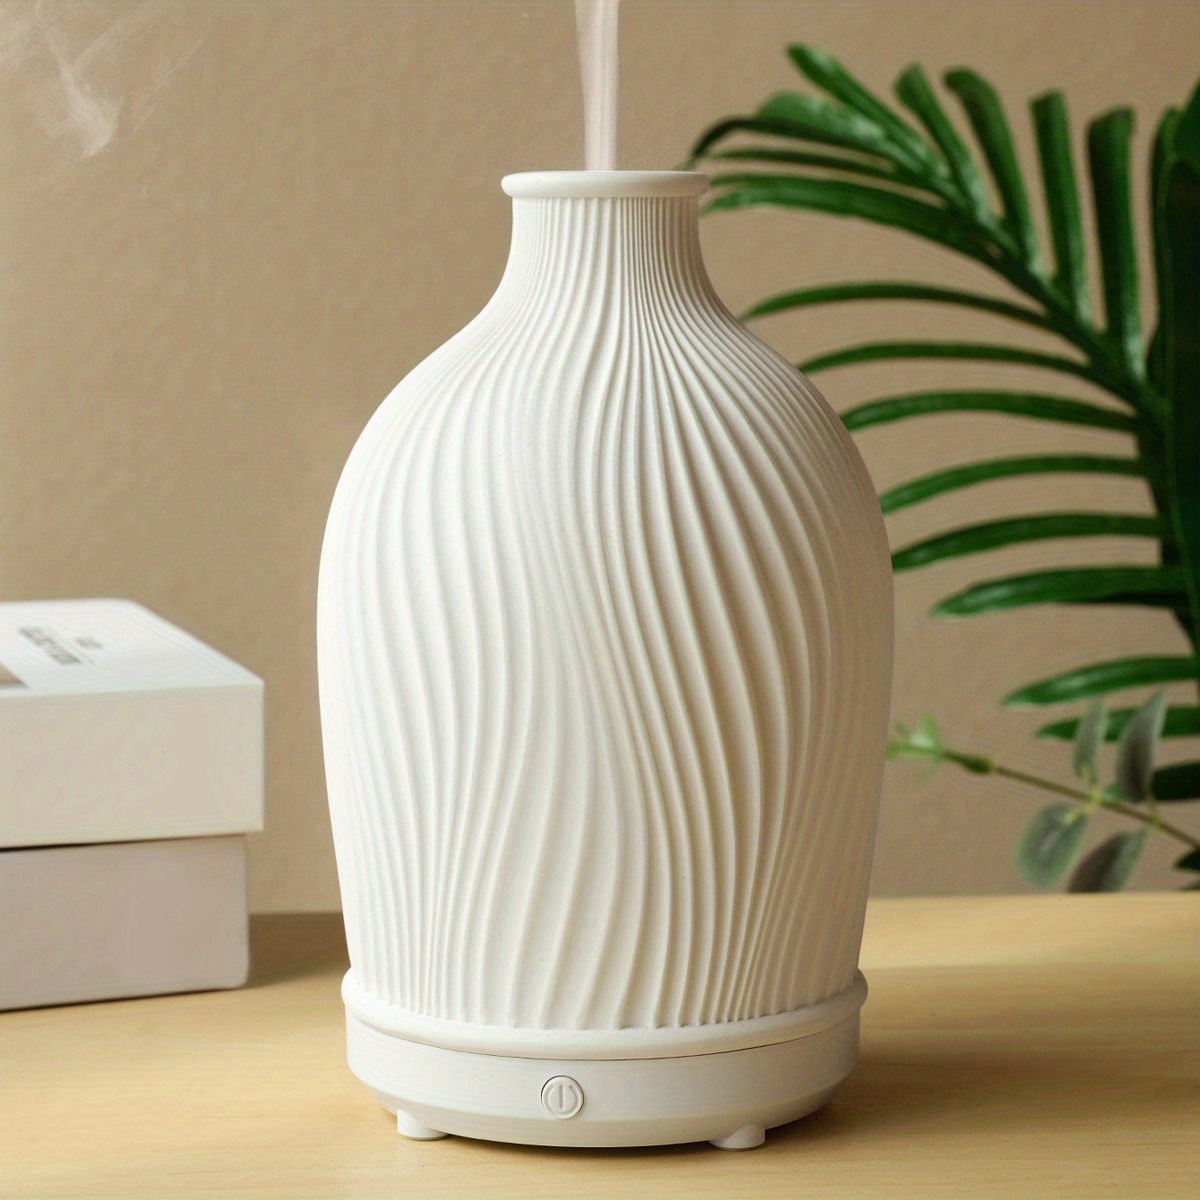 MIPOW VASO 3.0 Music Aromatherapy Diffuser Humidifier with Built-in Natural  Sound and relax music, White Noise therapy, Product Design Award Winner